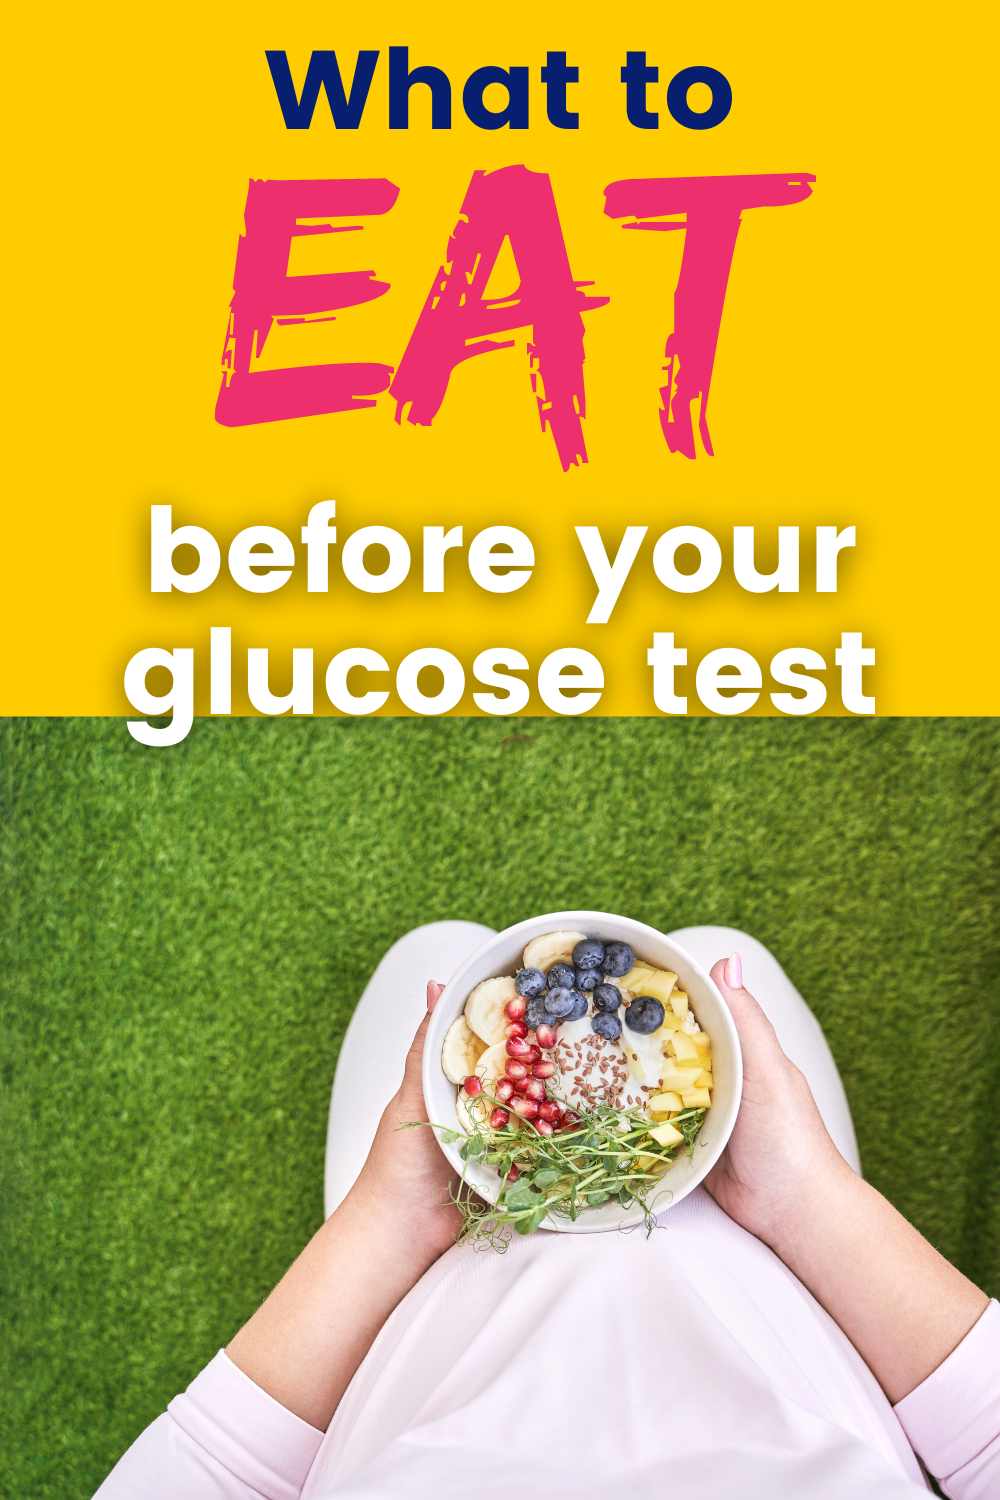 Your glucose test in pregnancy is VERY important. Gestational Diabetes can be a silent killer for both you and your baby, so having the test is not something you want to miss. BUT, what do you eat beforehand to make sure you're getting a fair shake.